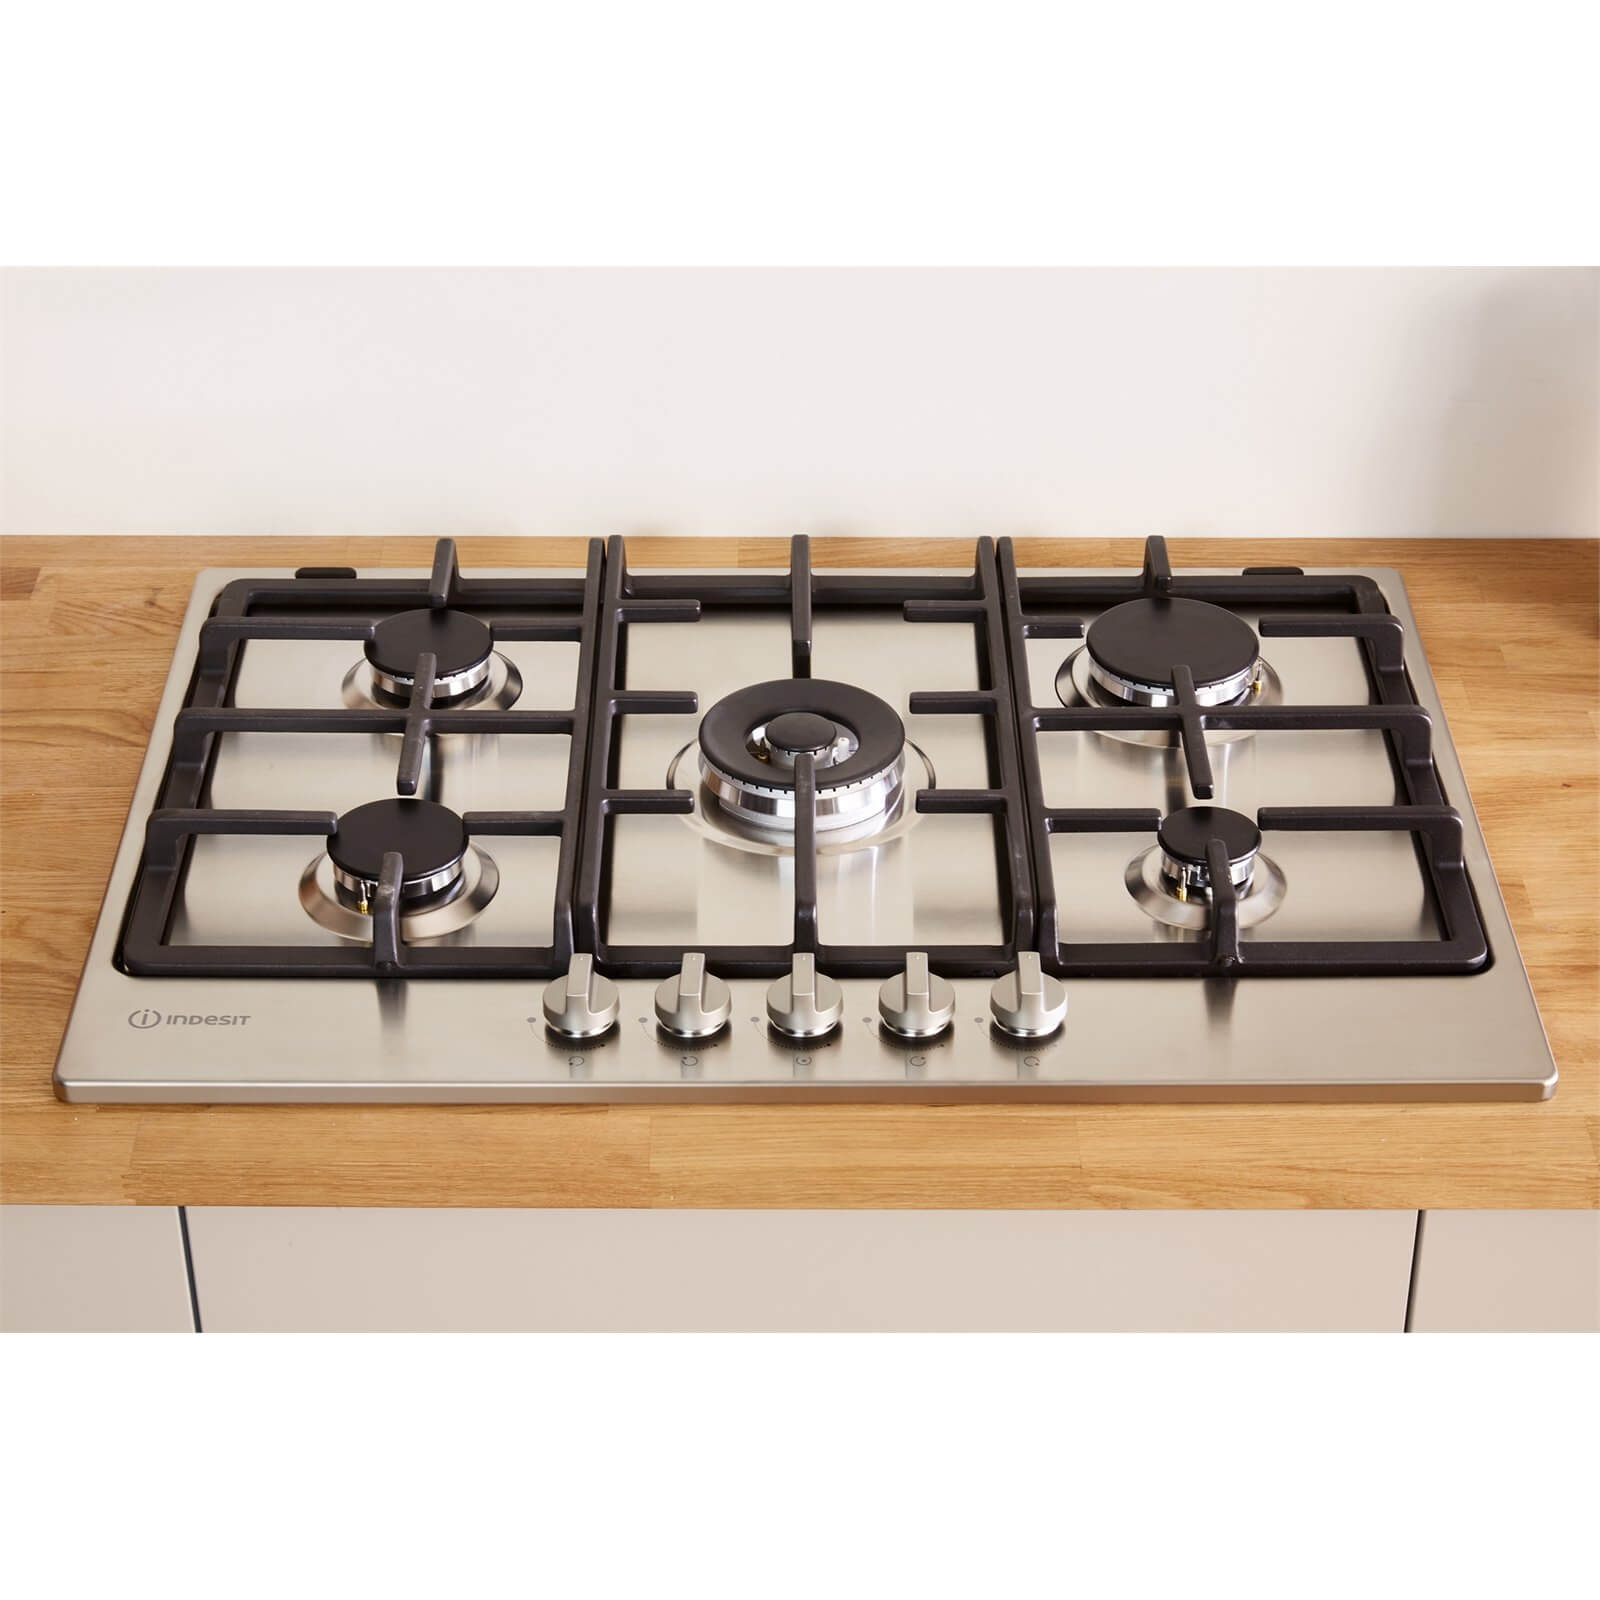 Indesit THP 751 W/IX/I Gas Hob - Stainless Steel